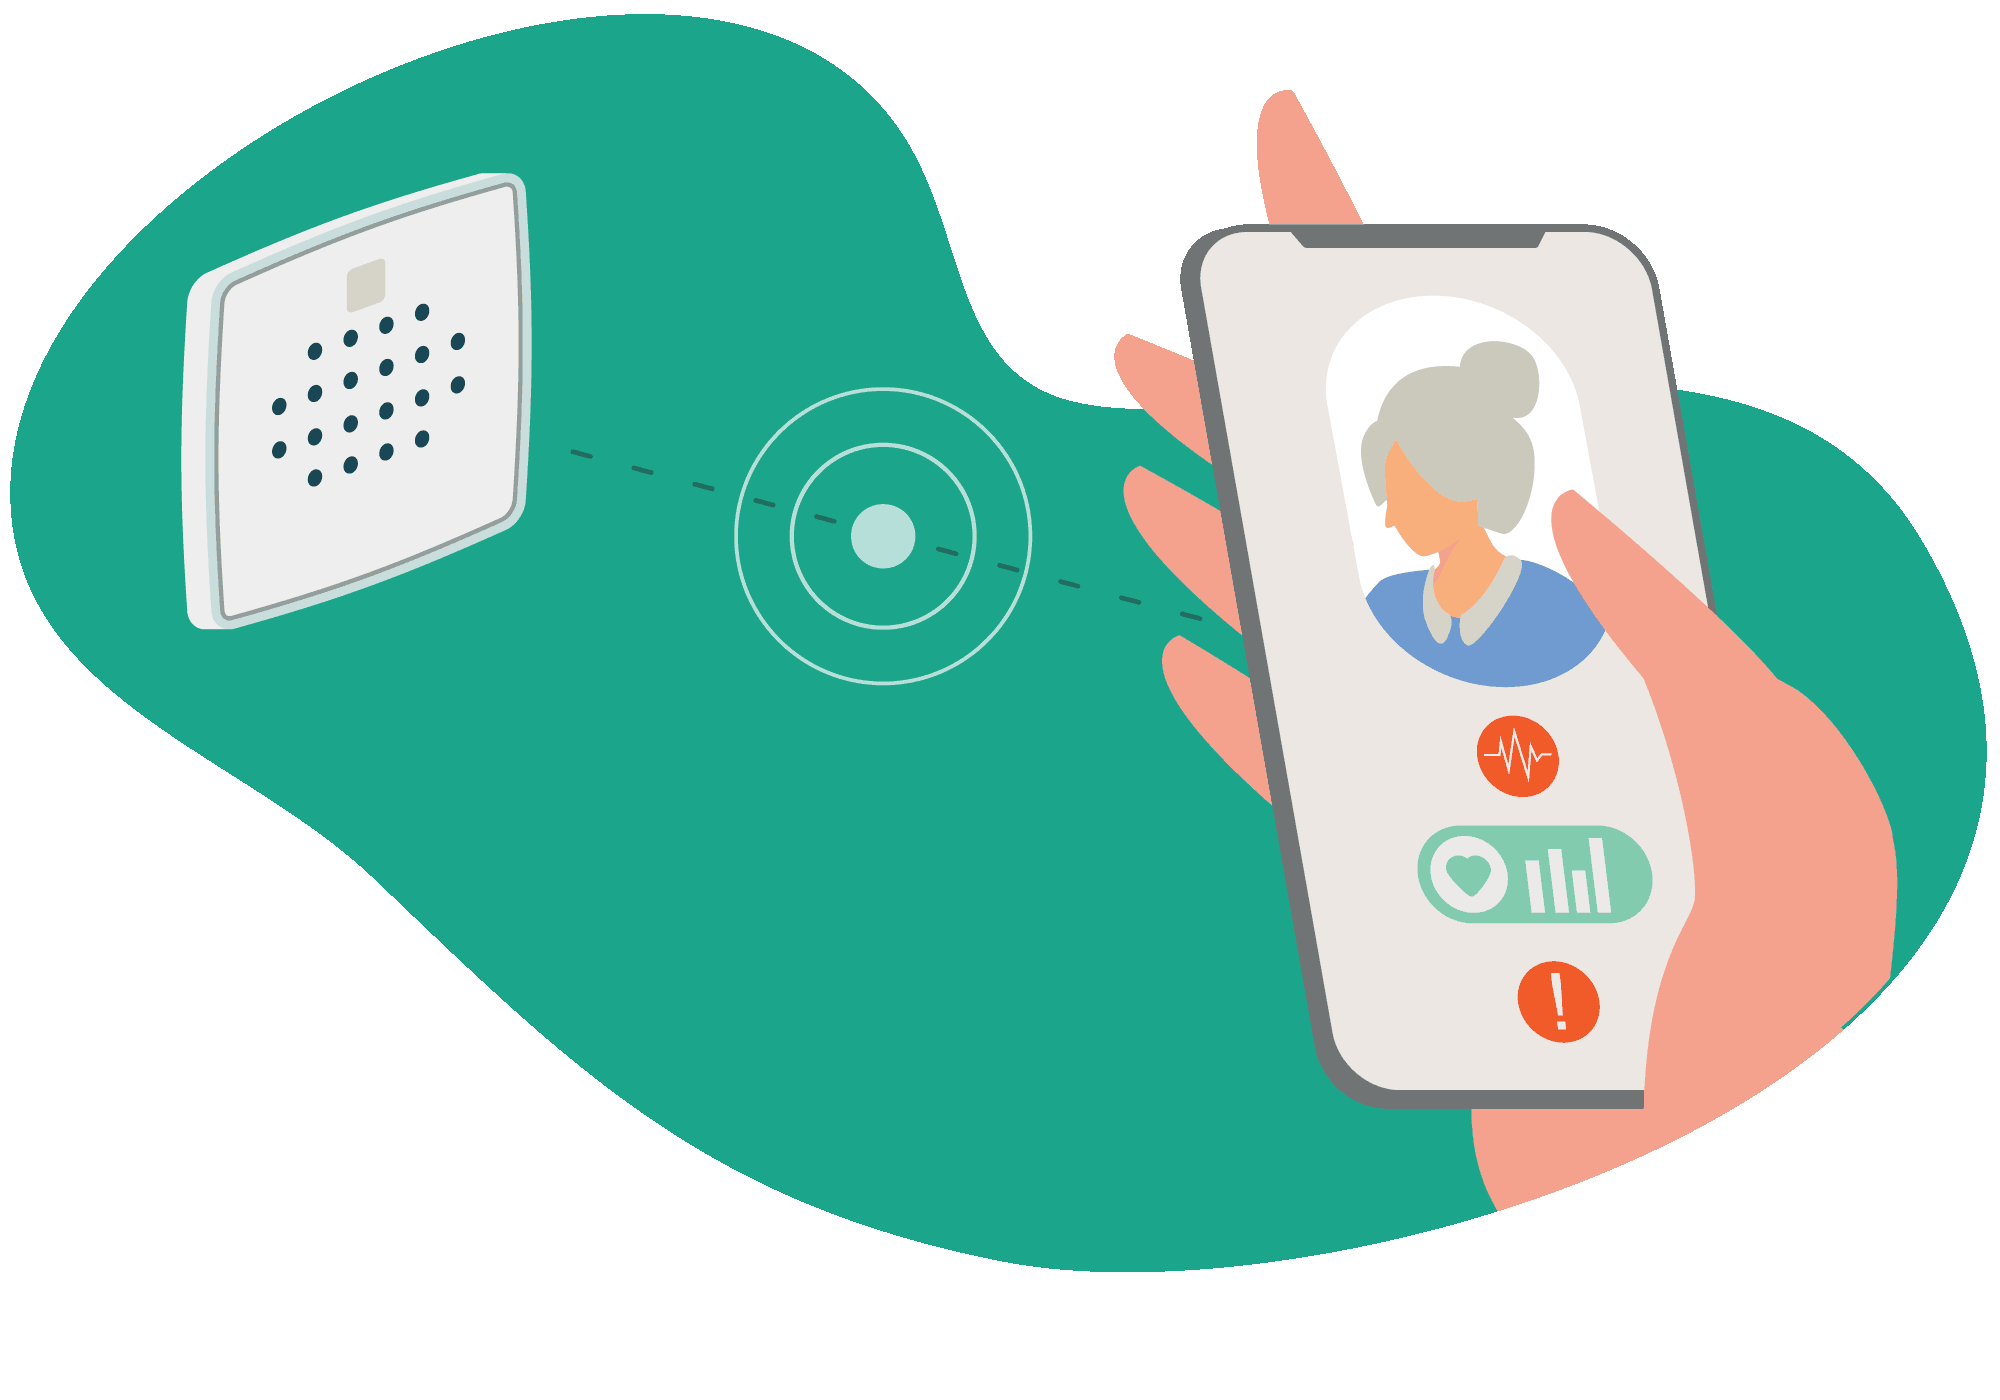 Ally's acoustic monitor connects carers to residents even when they aren't in the room.